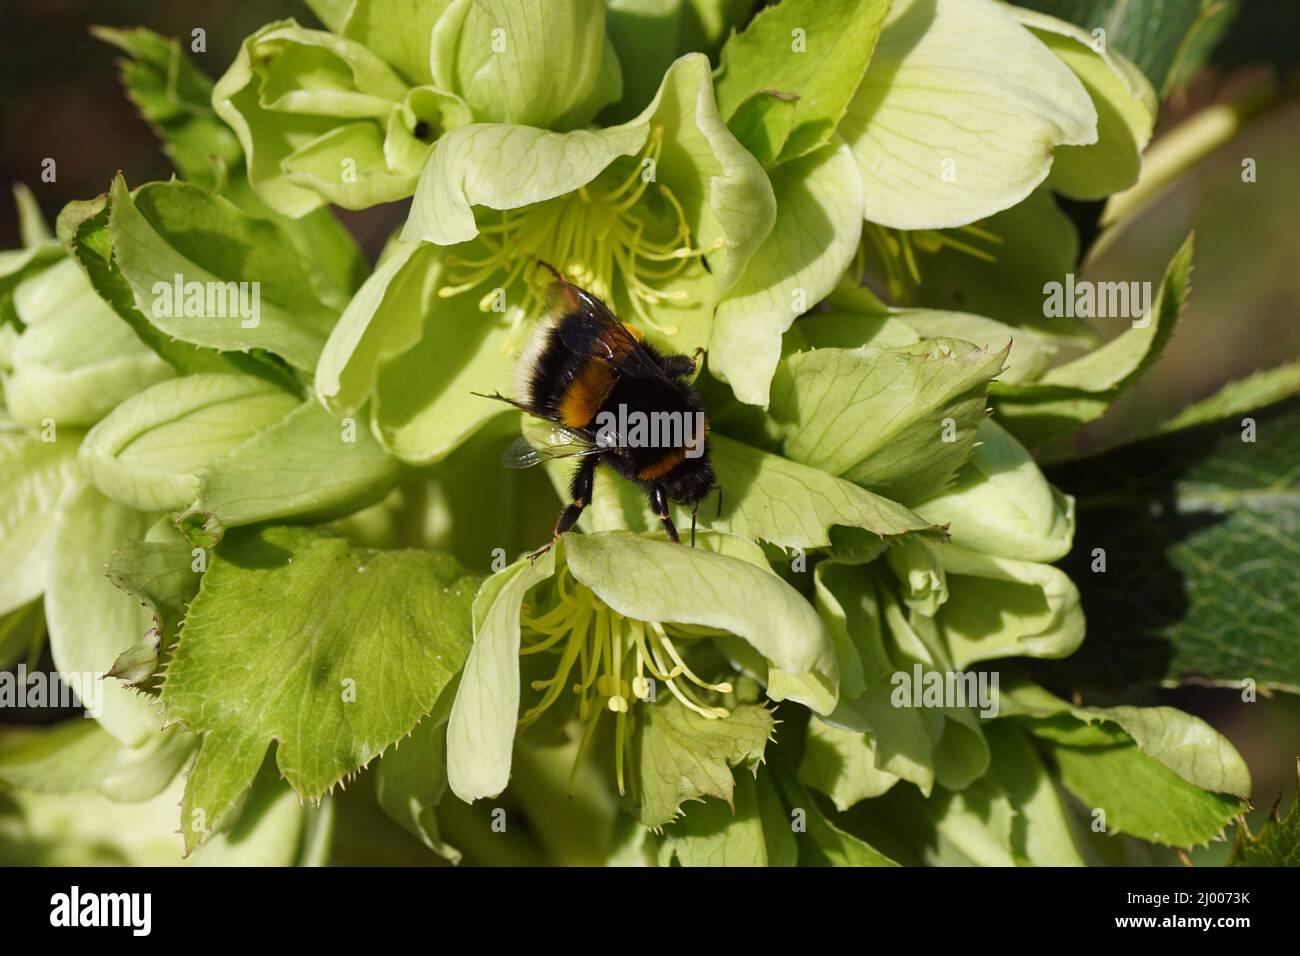 Queen, bumblebee species in the Bombus lucorum-complex, family Apidae on white green flowers of hellebores, family Ranunculaceae. Dutch garden. March, Stock Photo